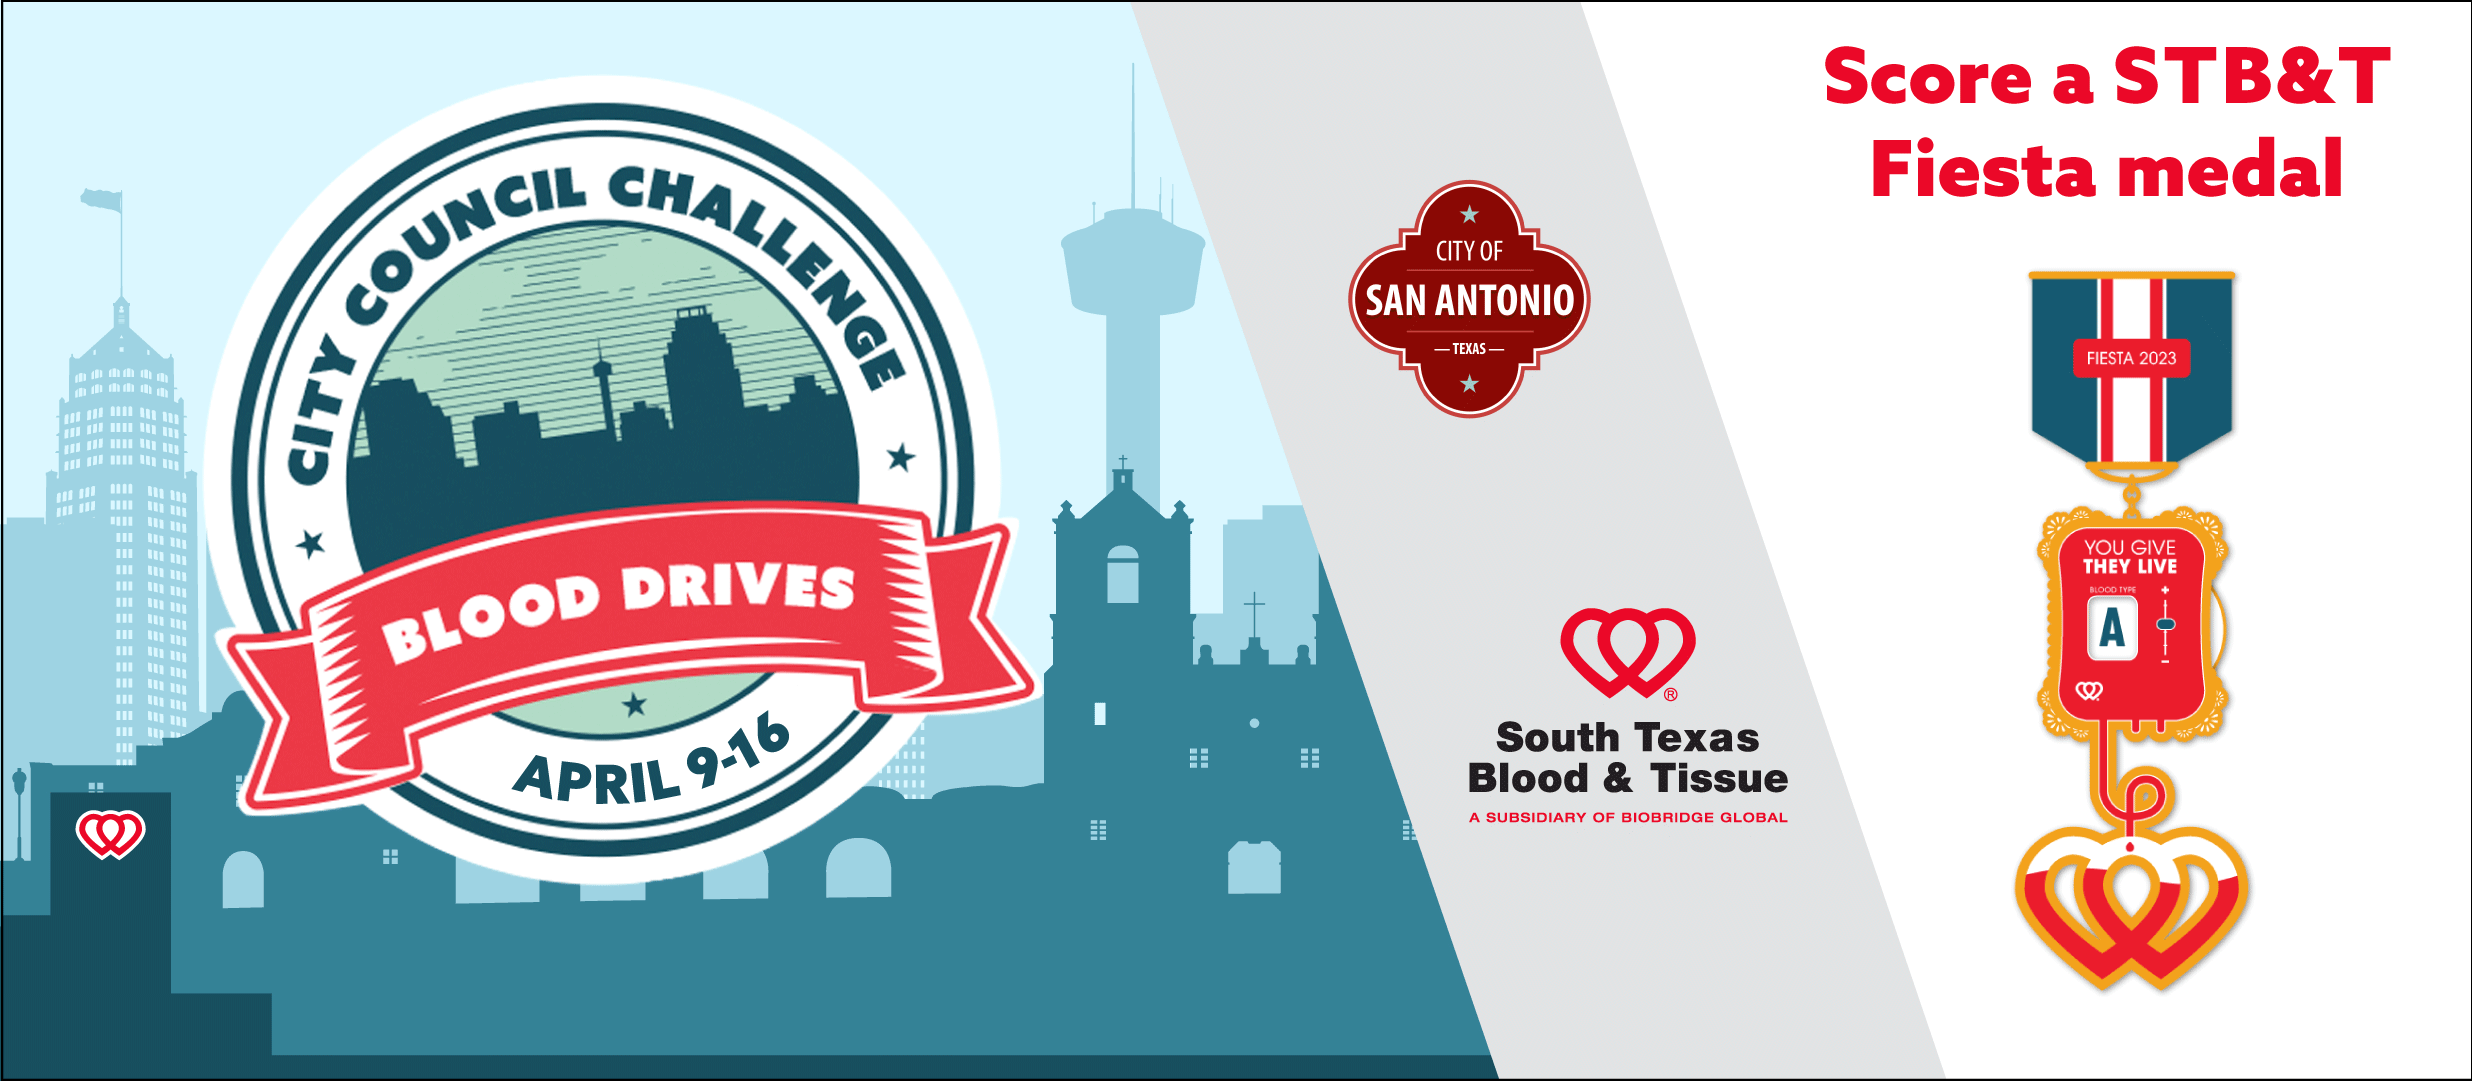 San Antonio City Council participates in SA Challenge blood drives to support patients, encourage community